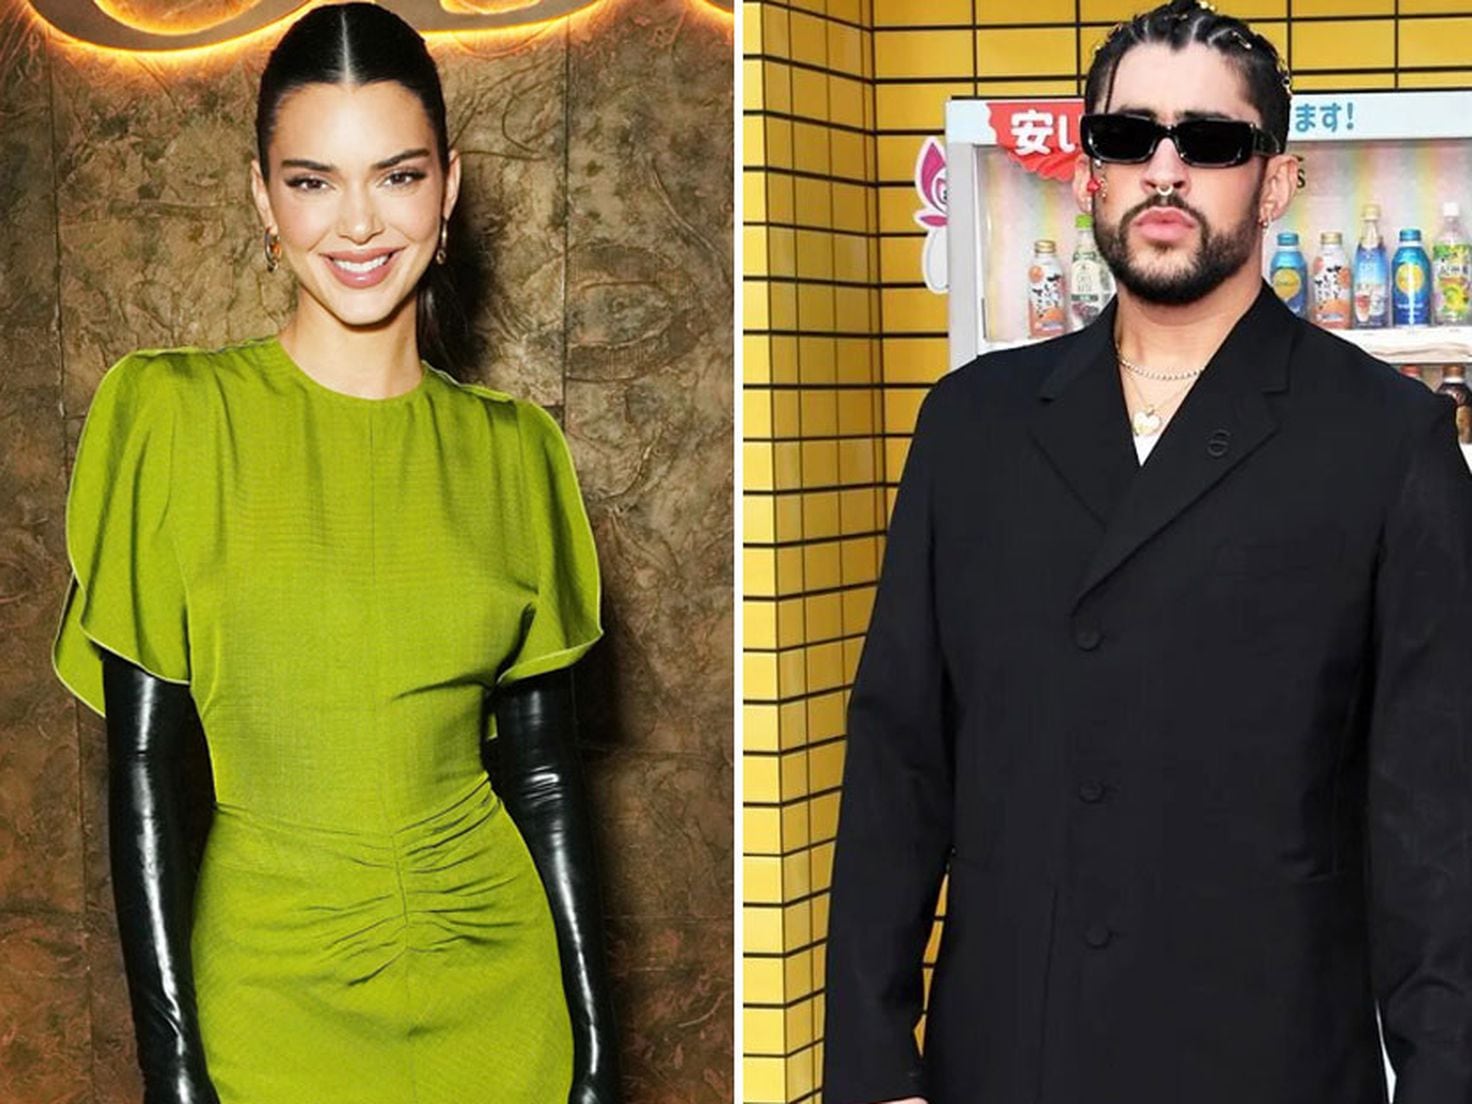 Kendall Jenner and Bad Bunny go official with their romance in